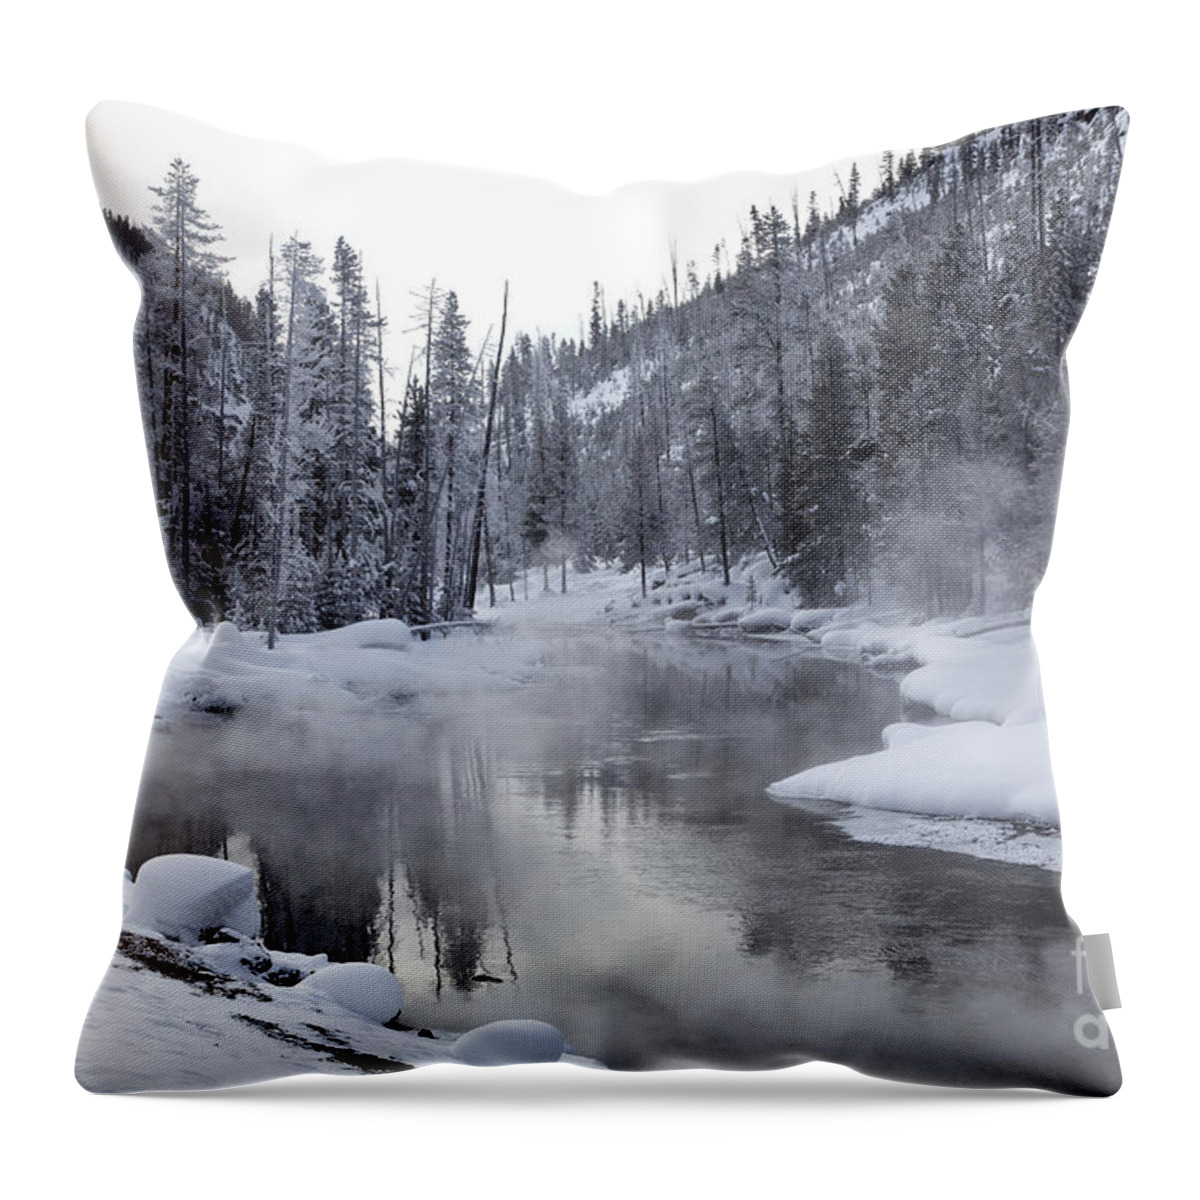 Gibbon River Throw Pillow featuring the photograph Gibbon River With Mist by Greg Dimijian